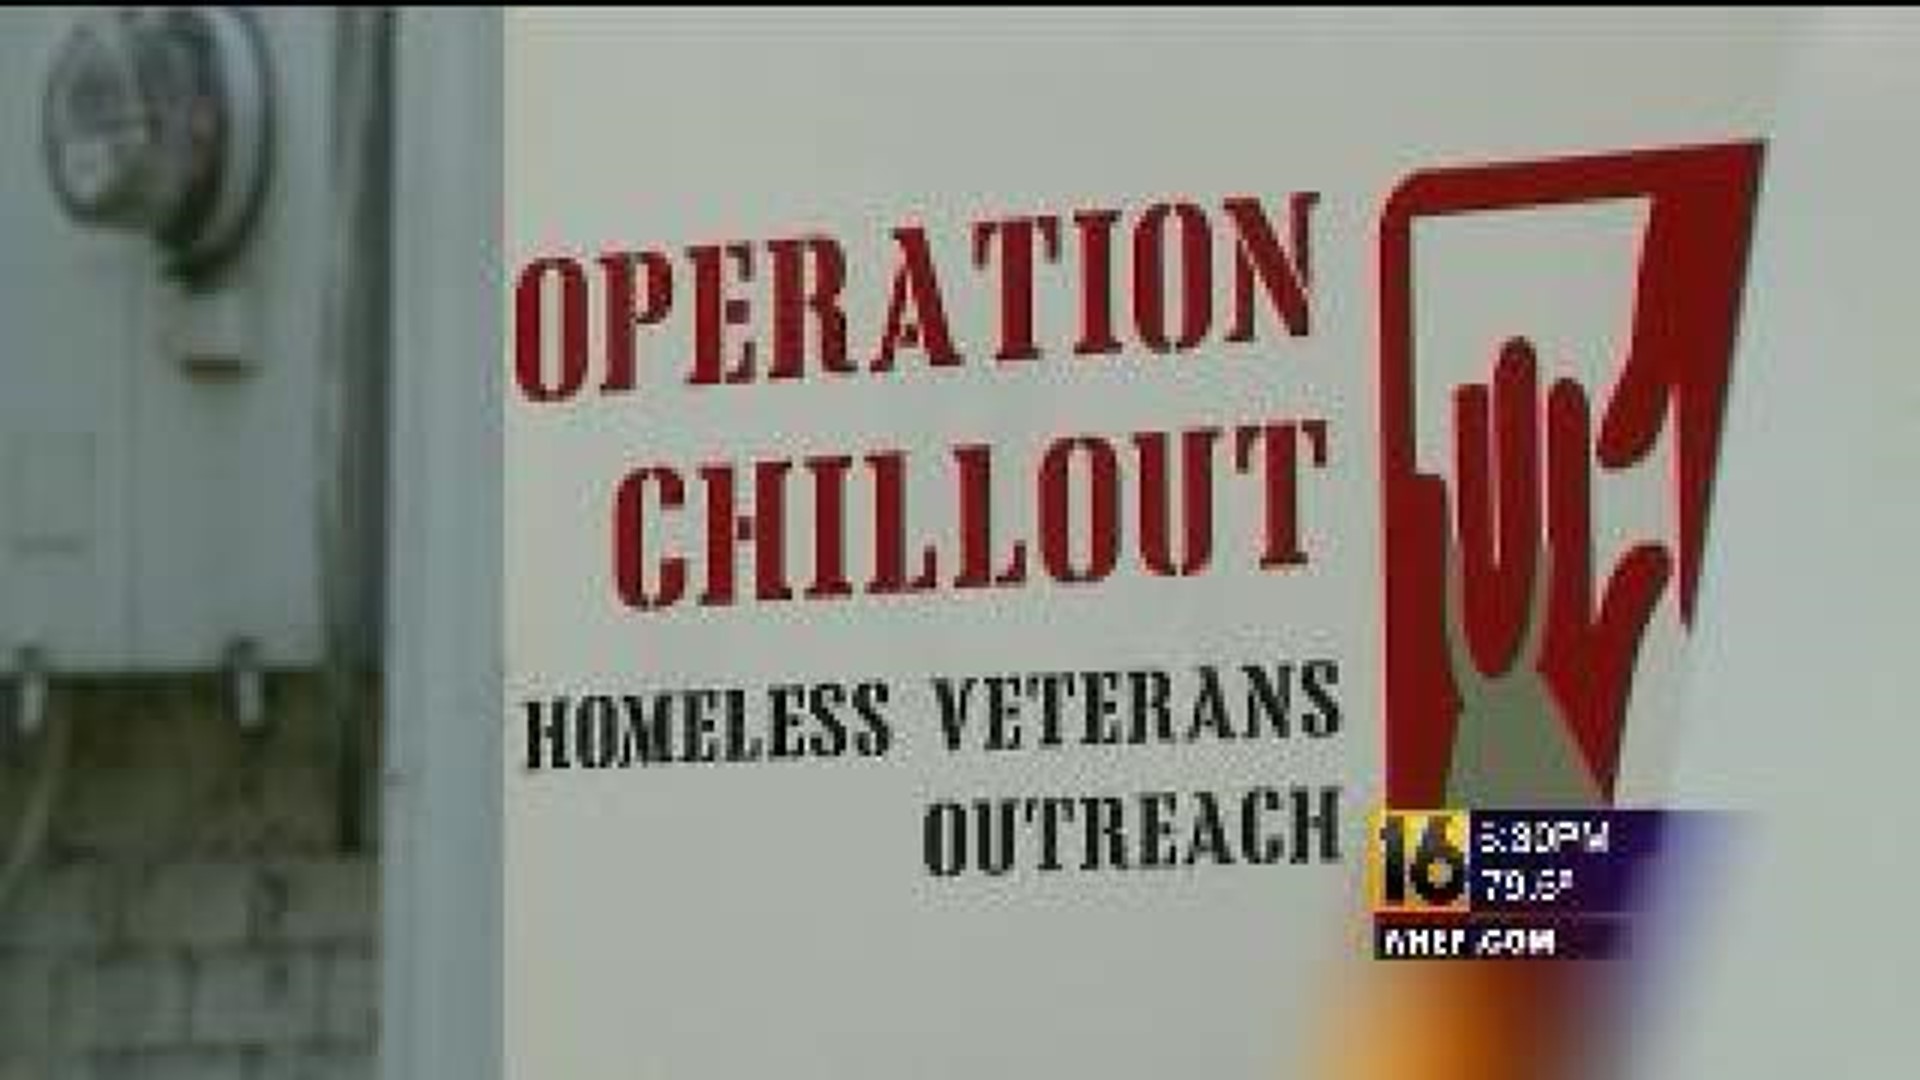 More Help Available For Homeless Veterans in the Poconos